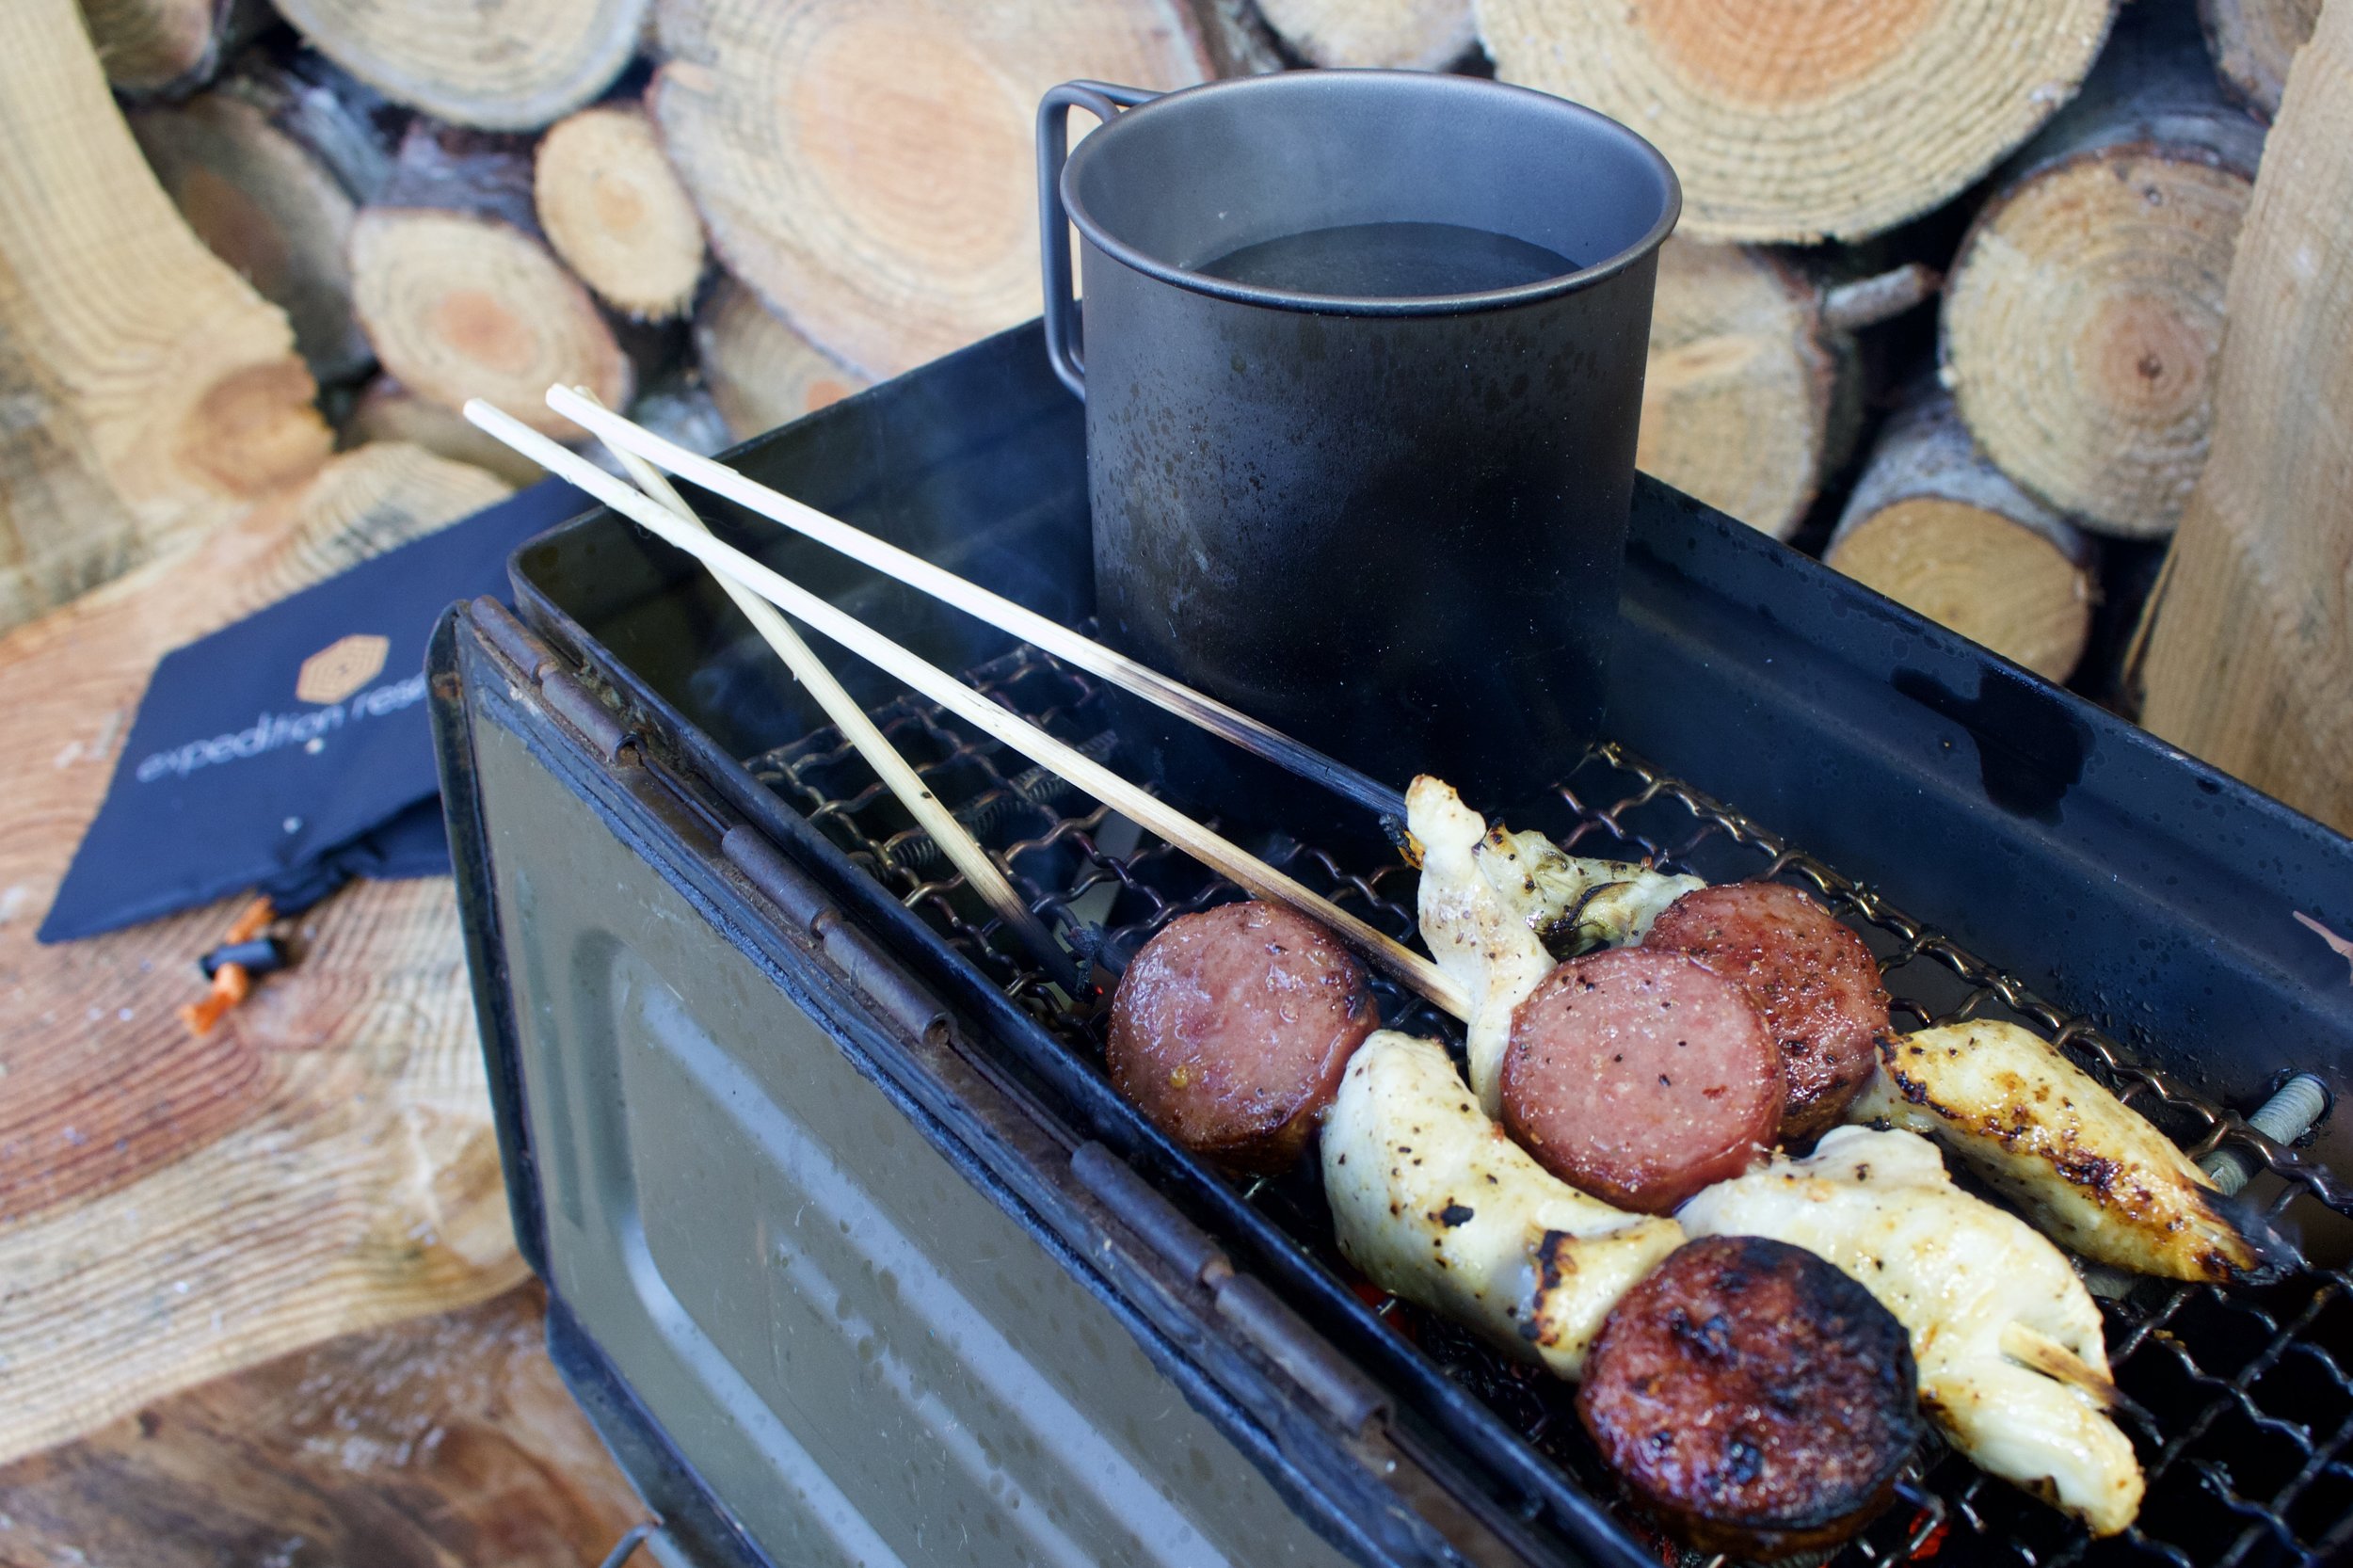 Survival Resources > Stoves And Grills > Blaze Bushcraft Grill